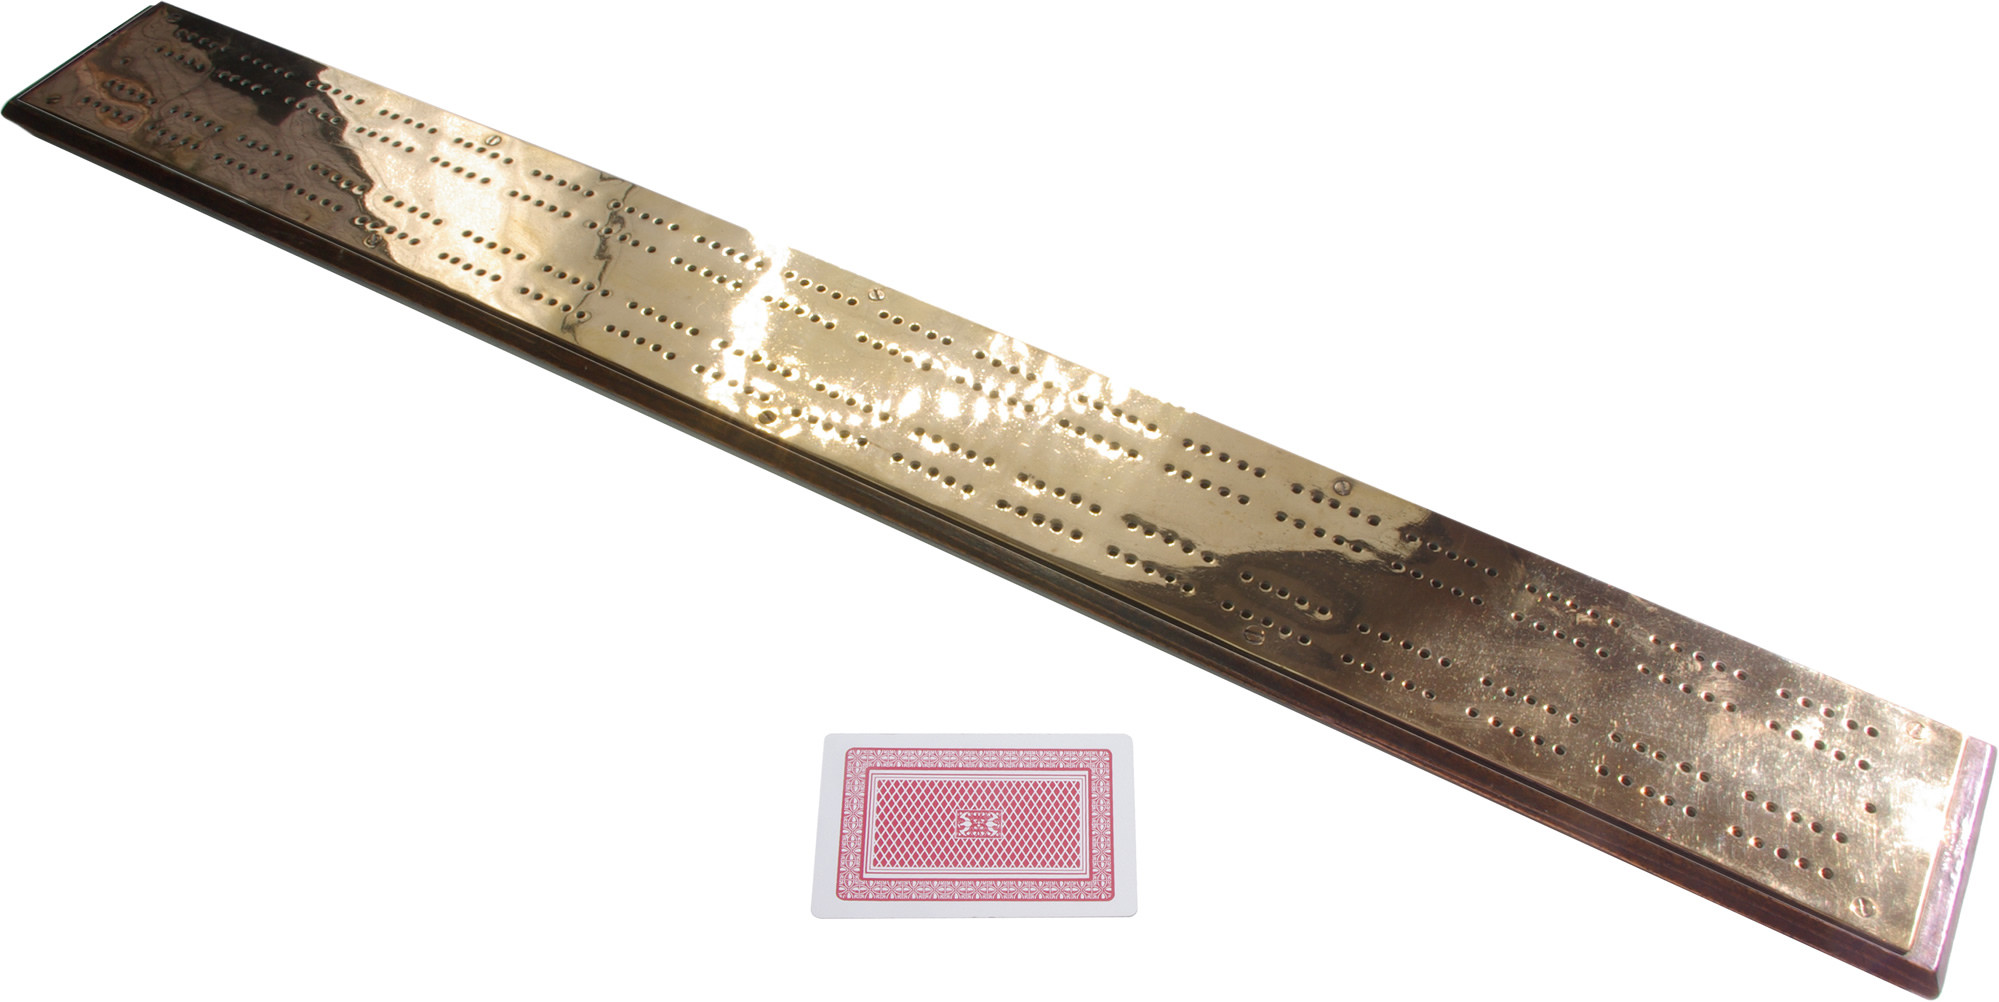 Giant brass competition cribbage board